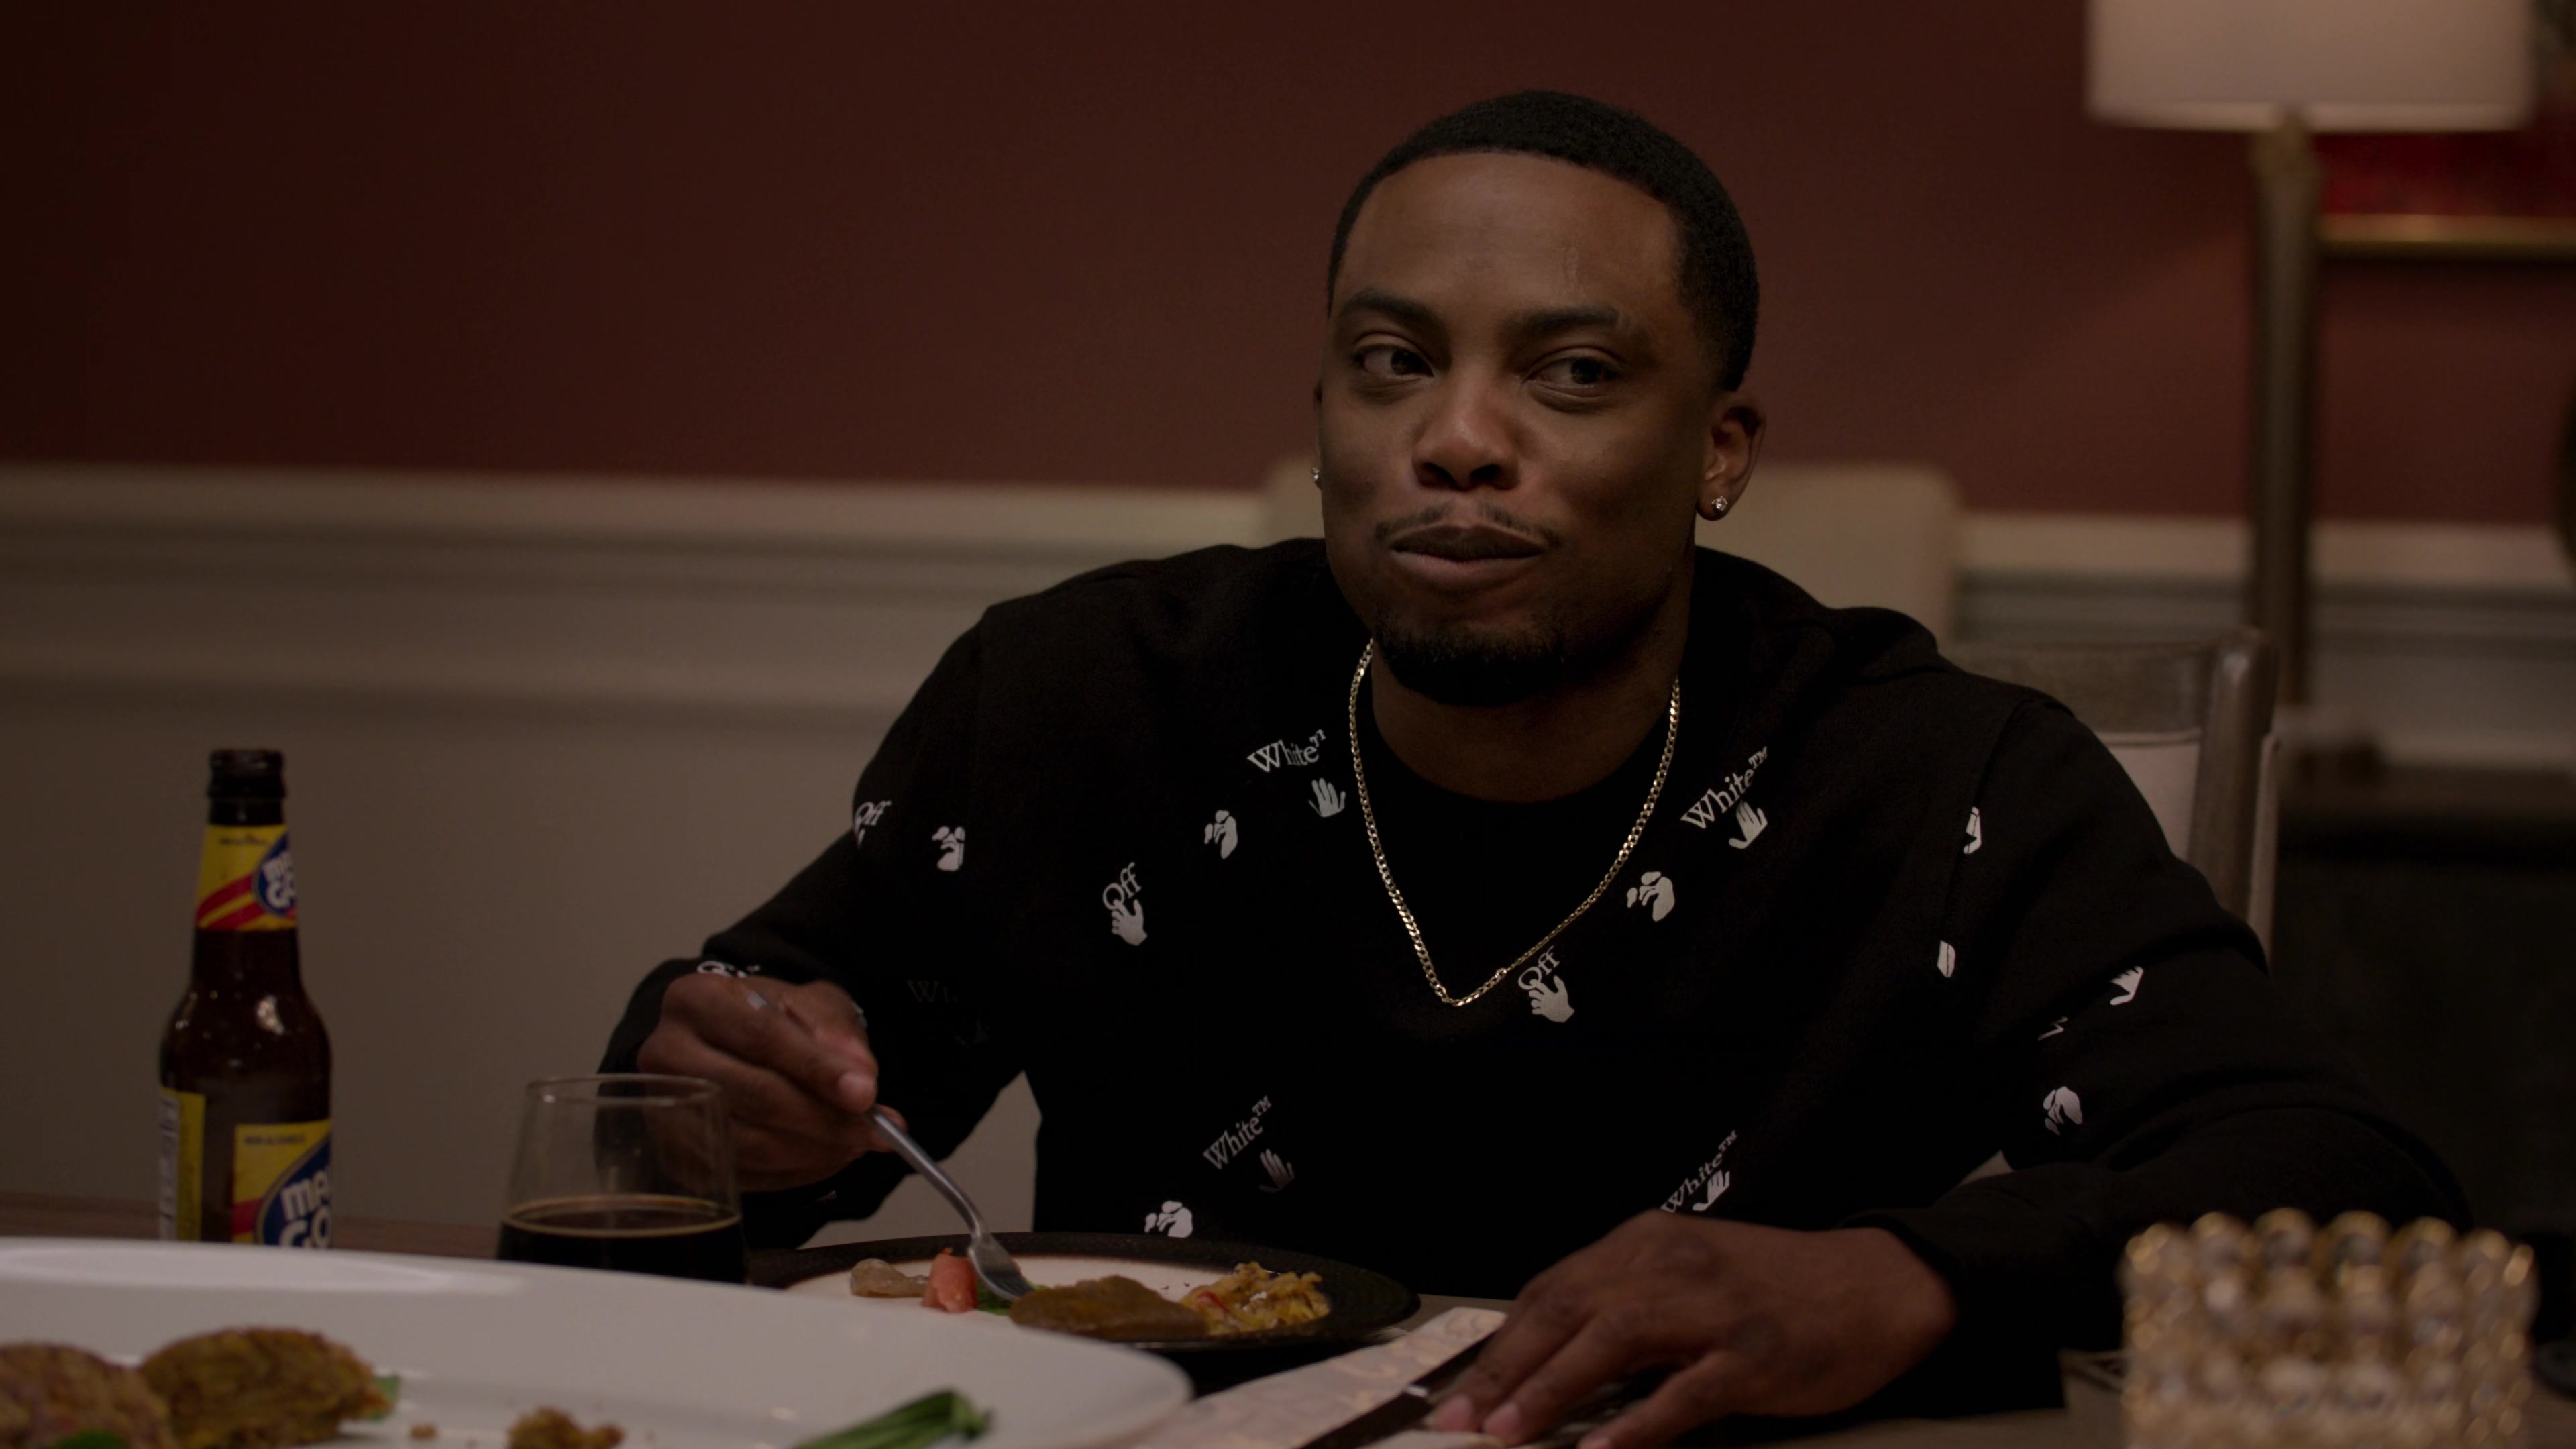 Givenchy Logo-Jacquard Wool Sweater worn by Cane Tejada (Woody McClain) as  seen in Power Book II: Ghost Wardrobe (S02E06)